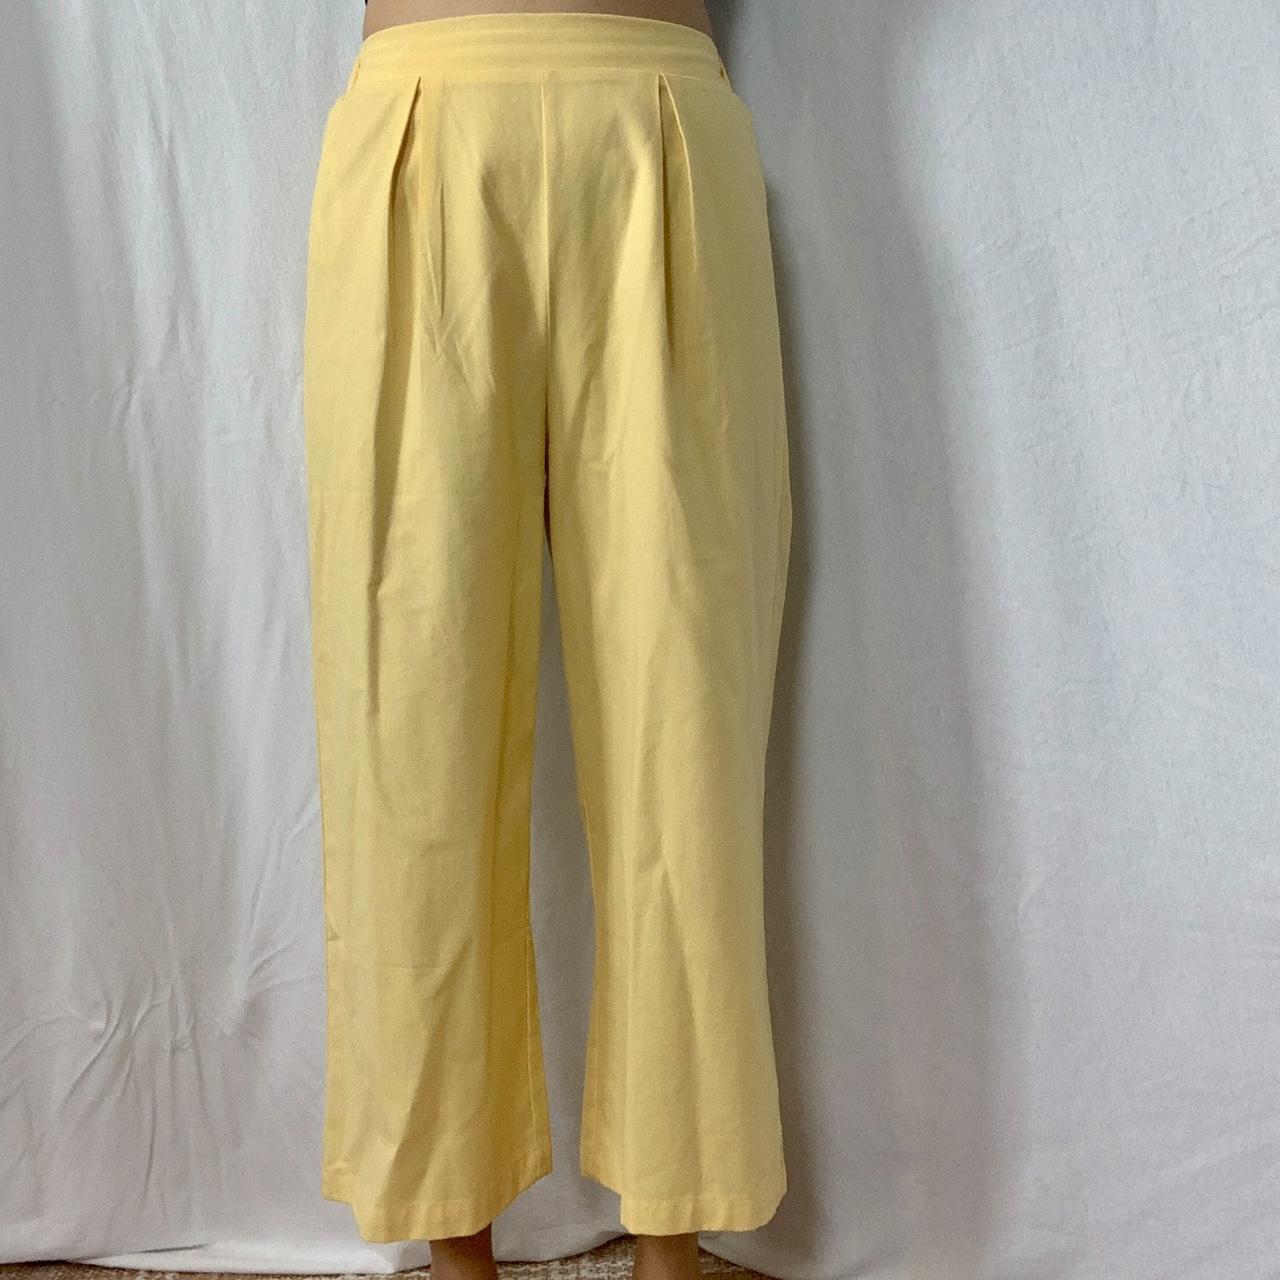 Product Image 2 - YELLOW LINEN PANTS

~ free shipping